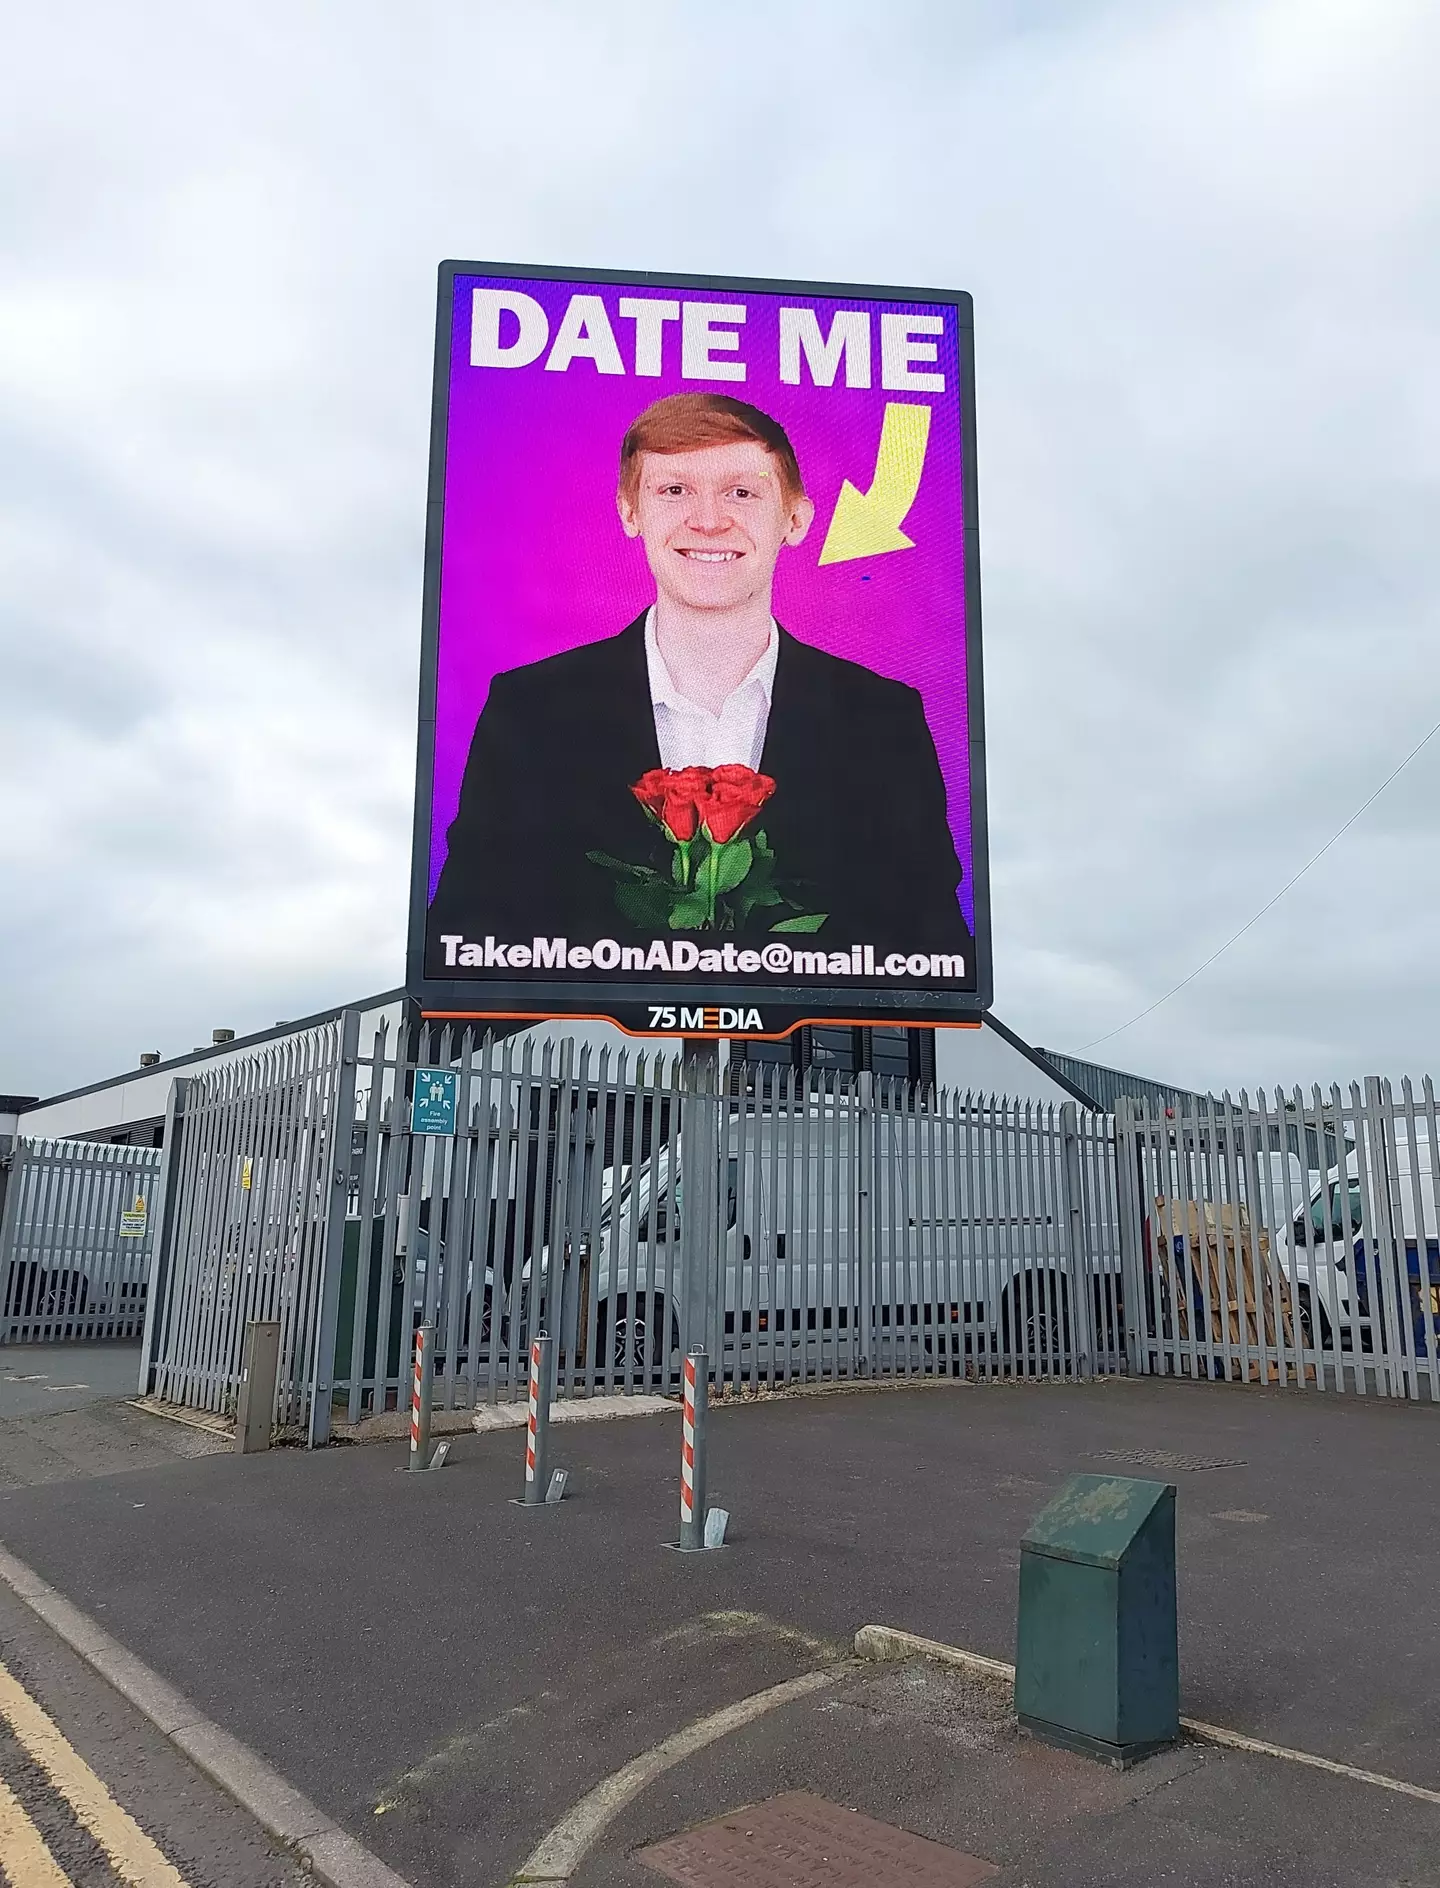 Ed says he's now speaking to four women as a result of the billboard.